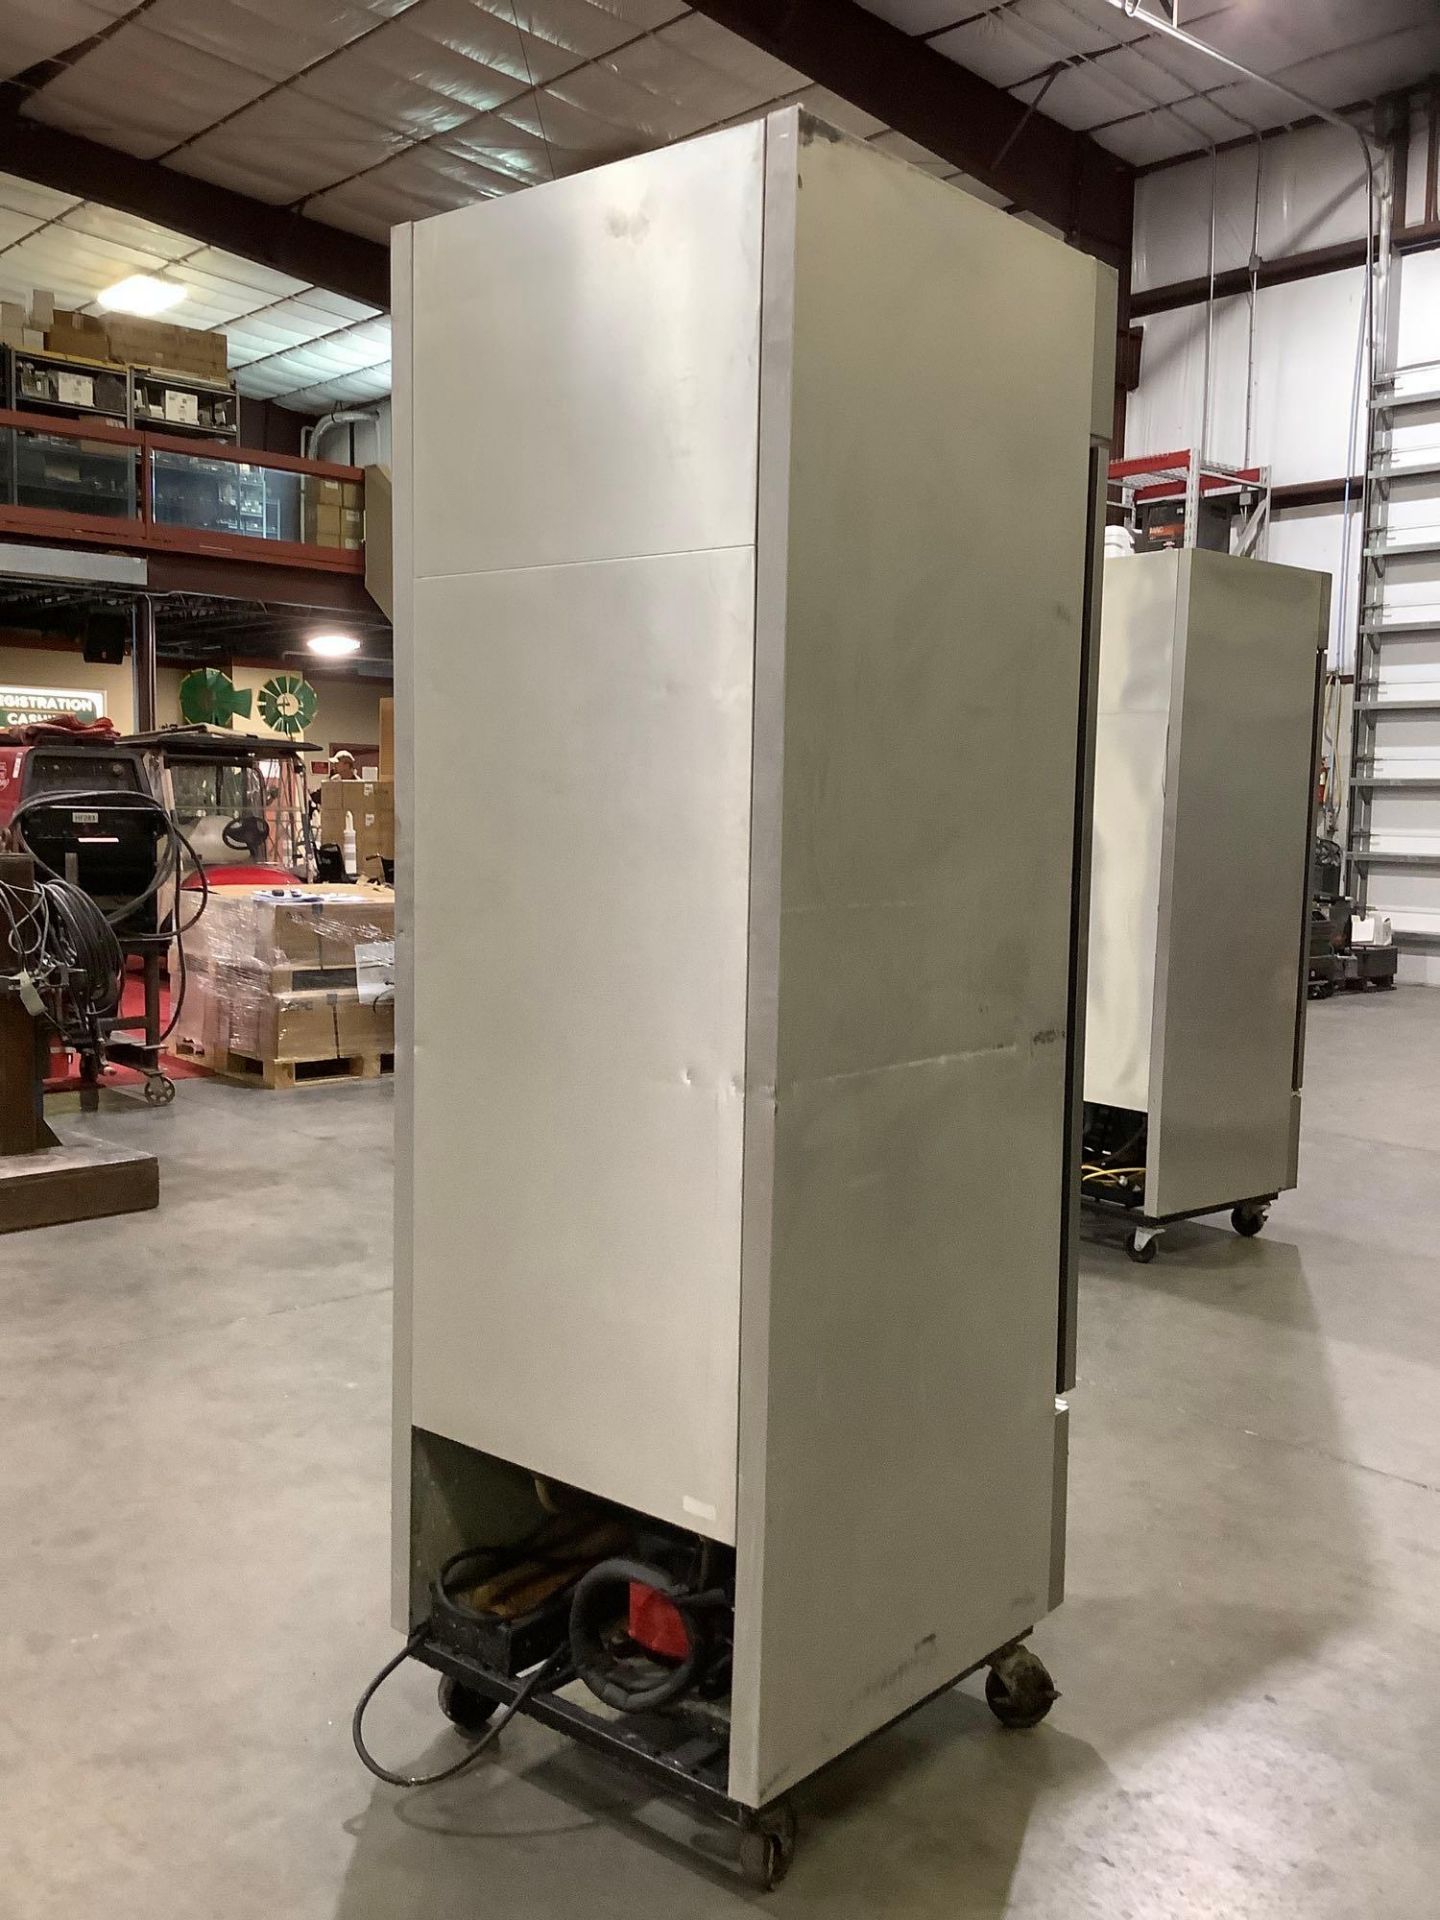 TRUE COMMERCIAL SINGLE DOOR REFRIGERATOR MODEL T-19F, APPROX 27” W x 30” L x 84” T, WORKS - Image 17 of 20